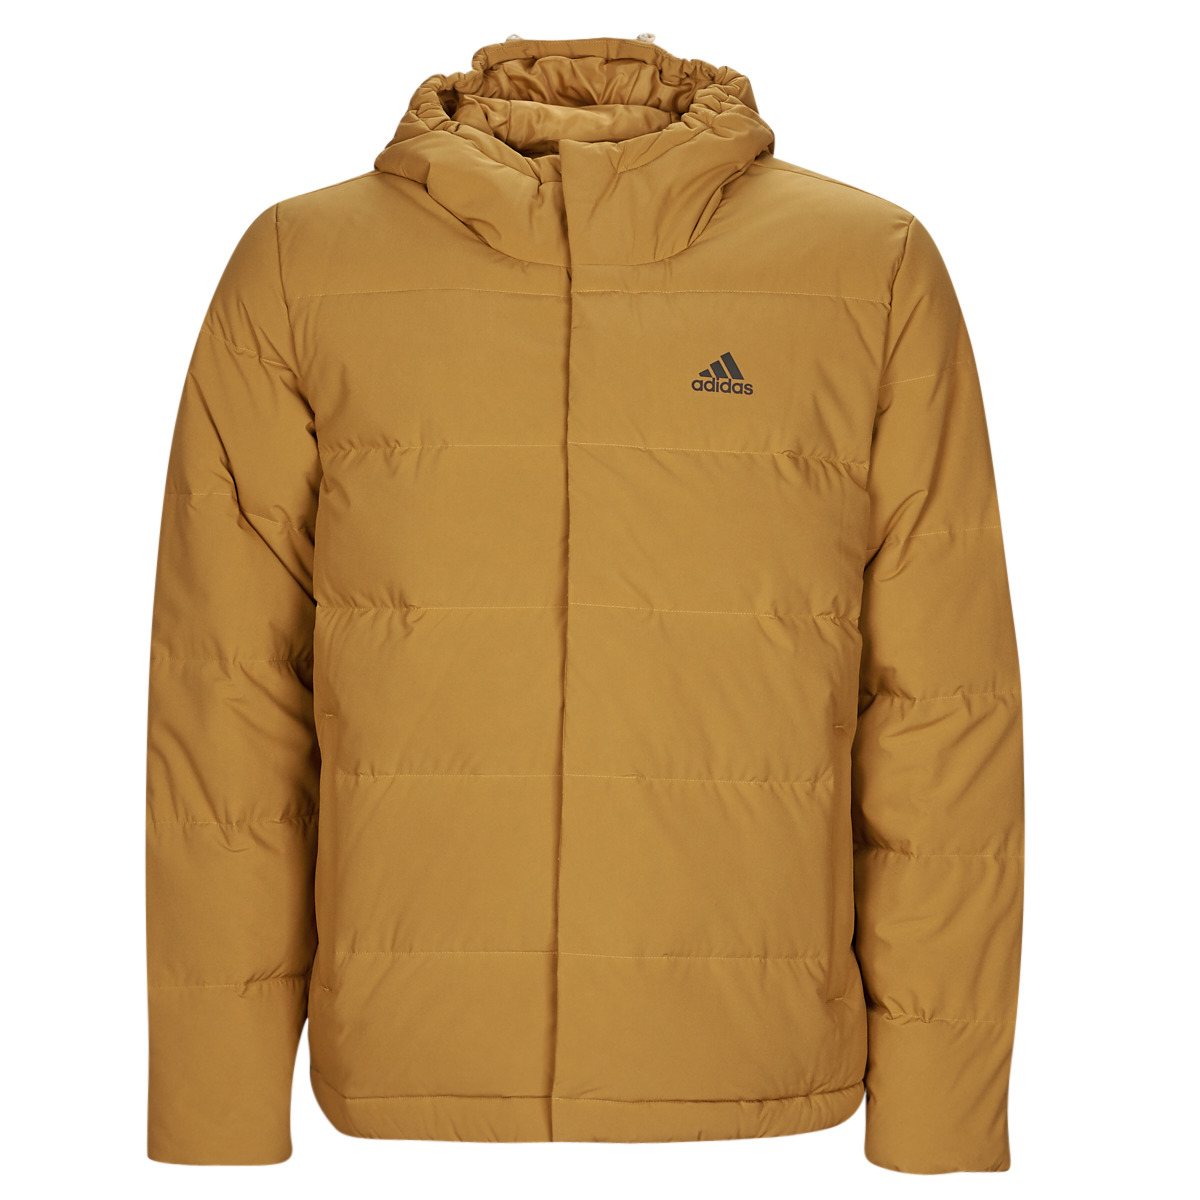 adidas Performance HELIONIC HO JKT Mes   Fast delivery   Spartoo